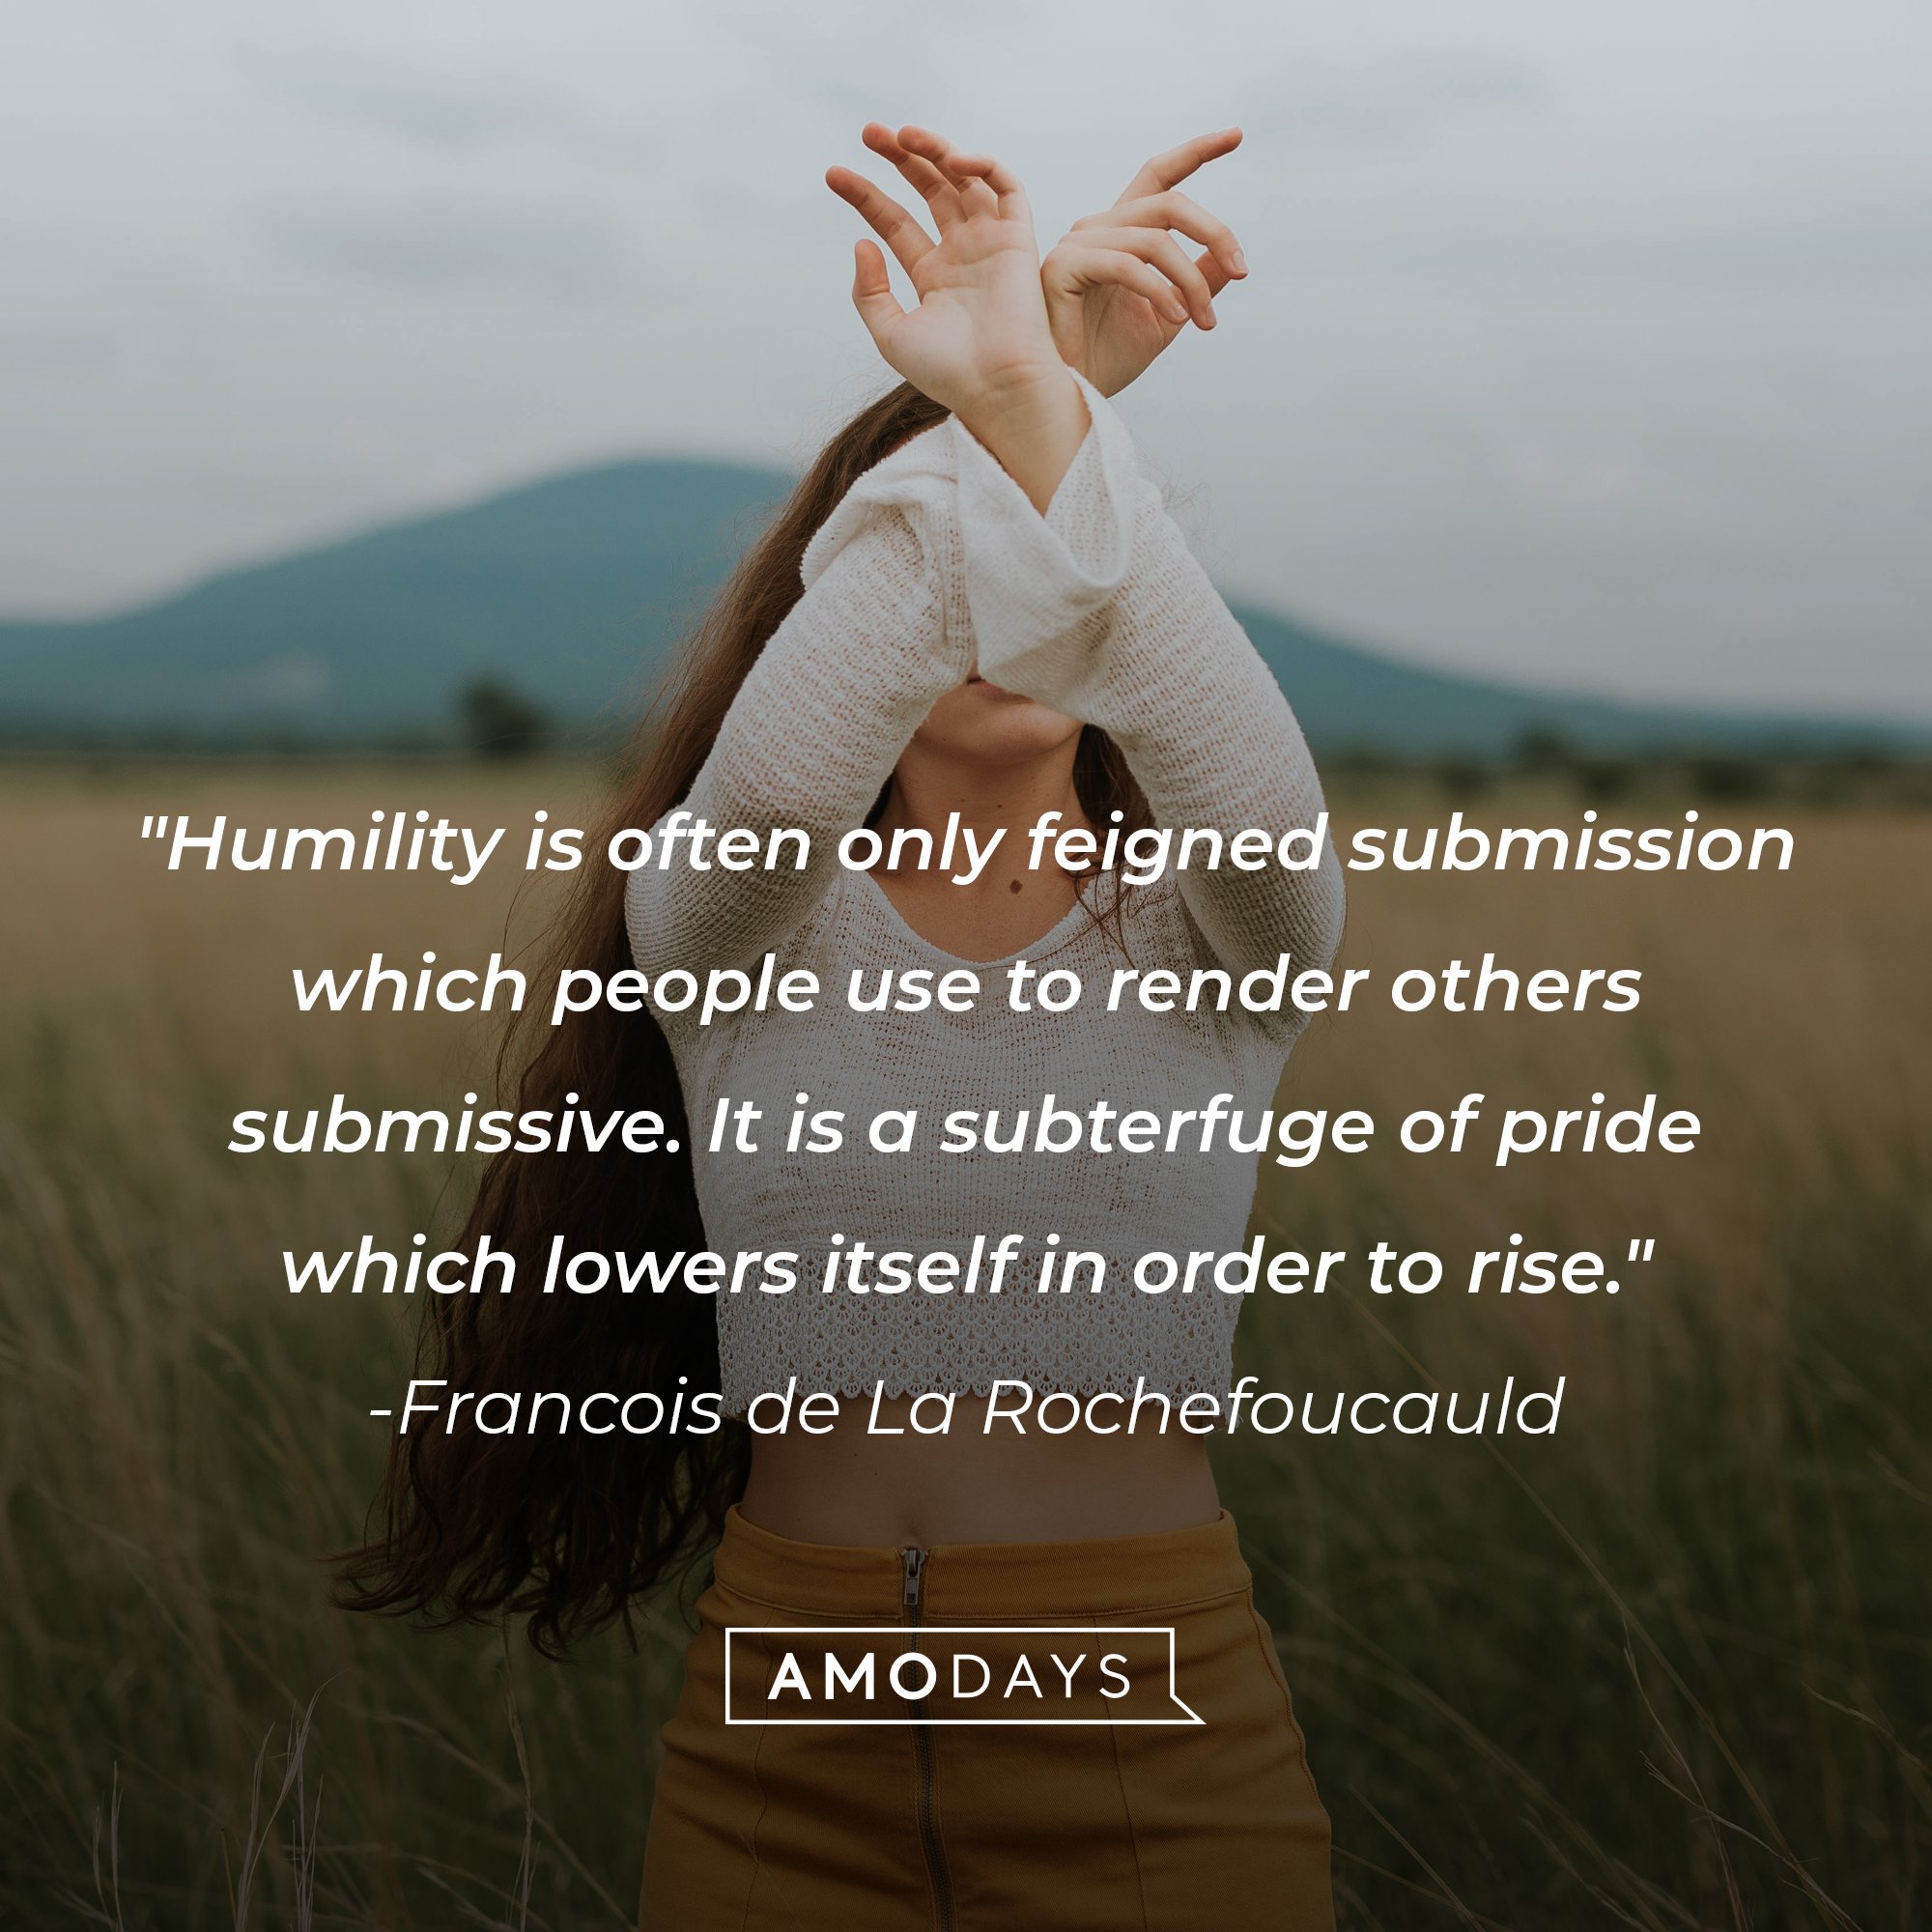 Francois de La Rochefoucauld’s quote: "Humility is often only feigned submission which people use to render others submissive. It is a subterfuge of pride which lowers itself in order to rise."  | Image: AmoDays 